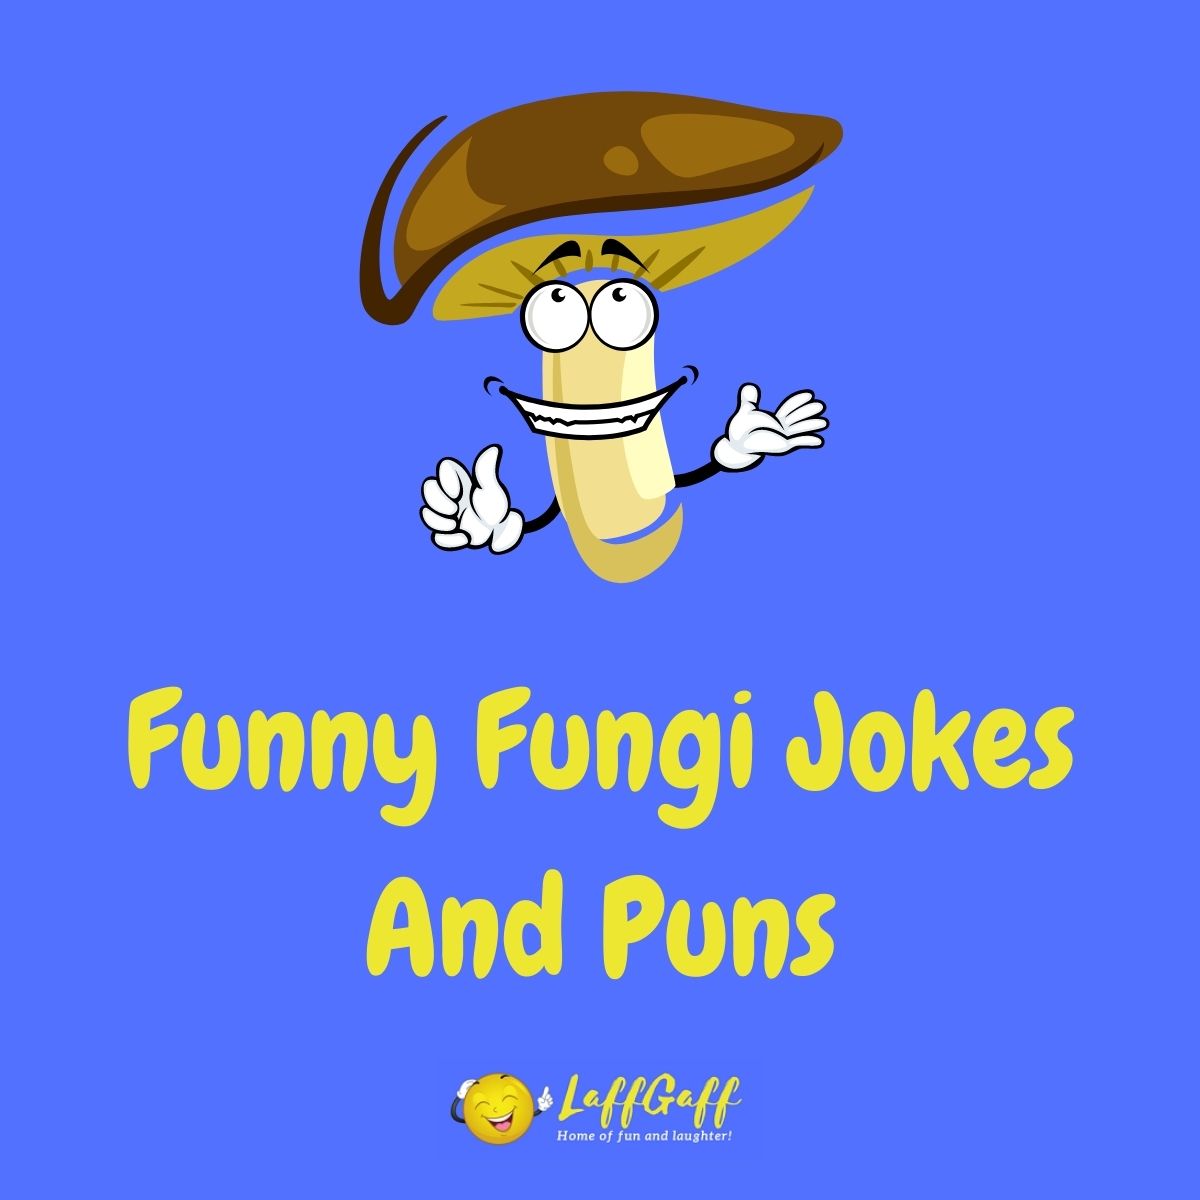 Featured image for a page of funny fungi jokes and puns.